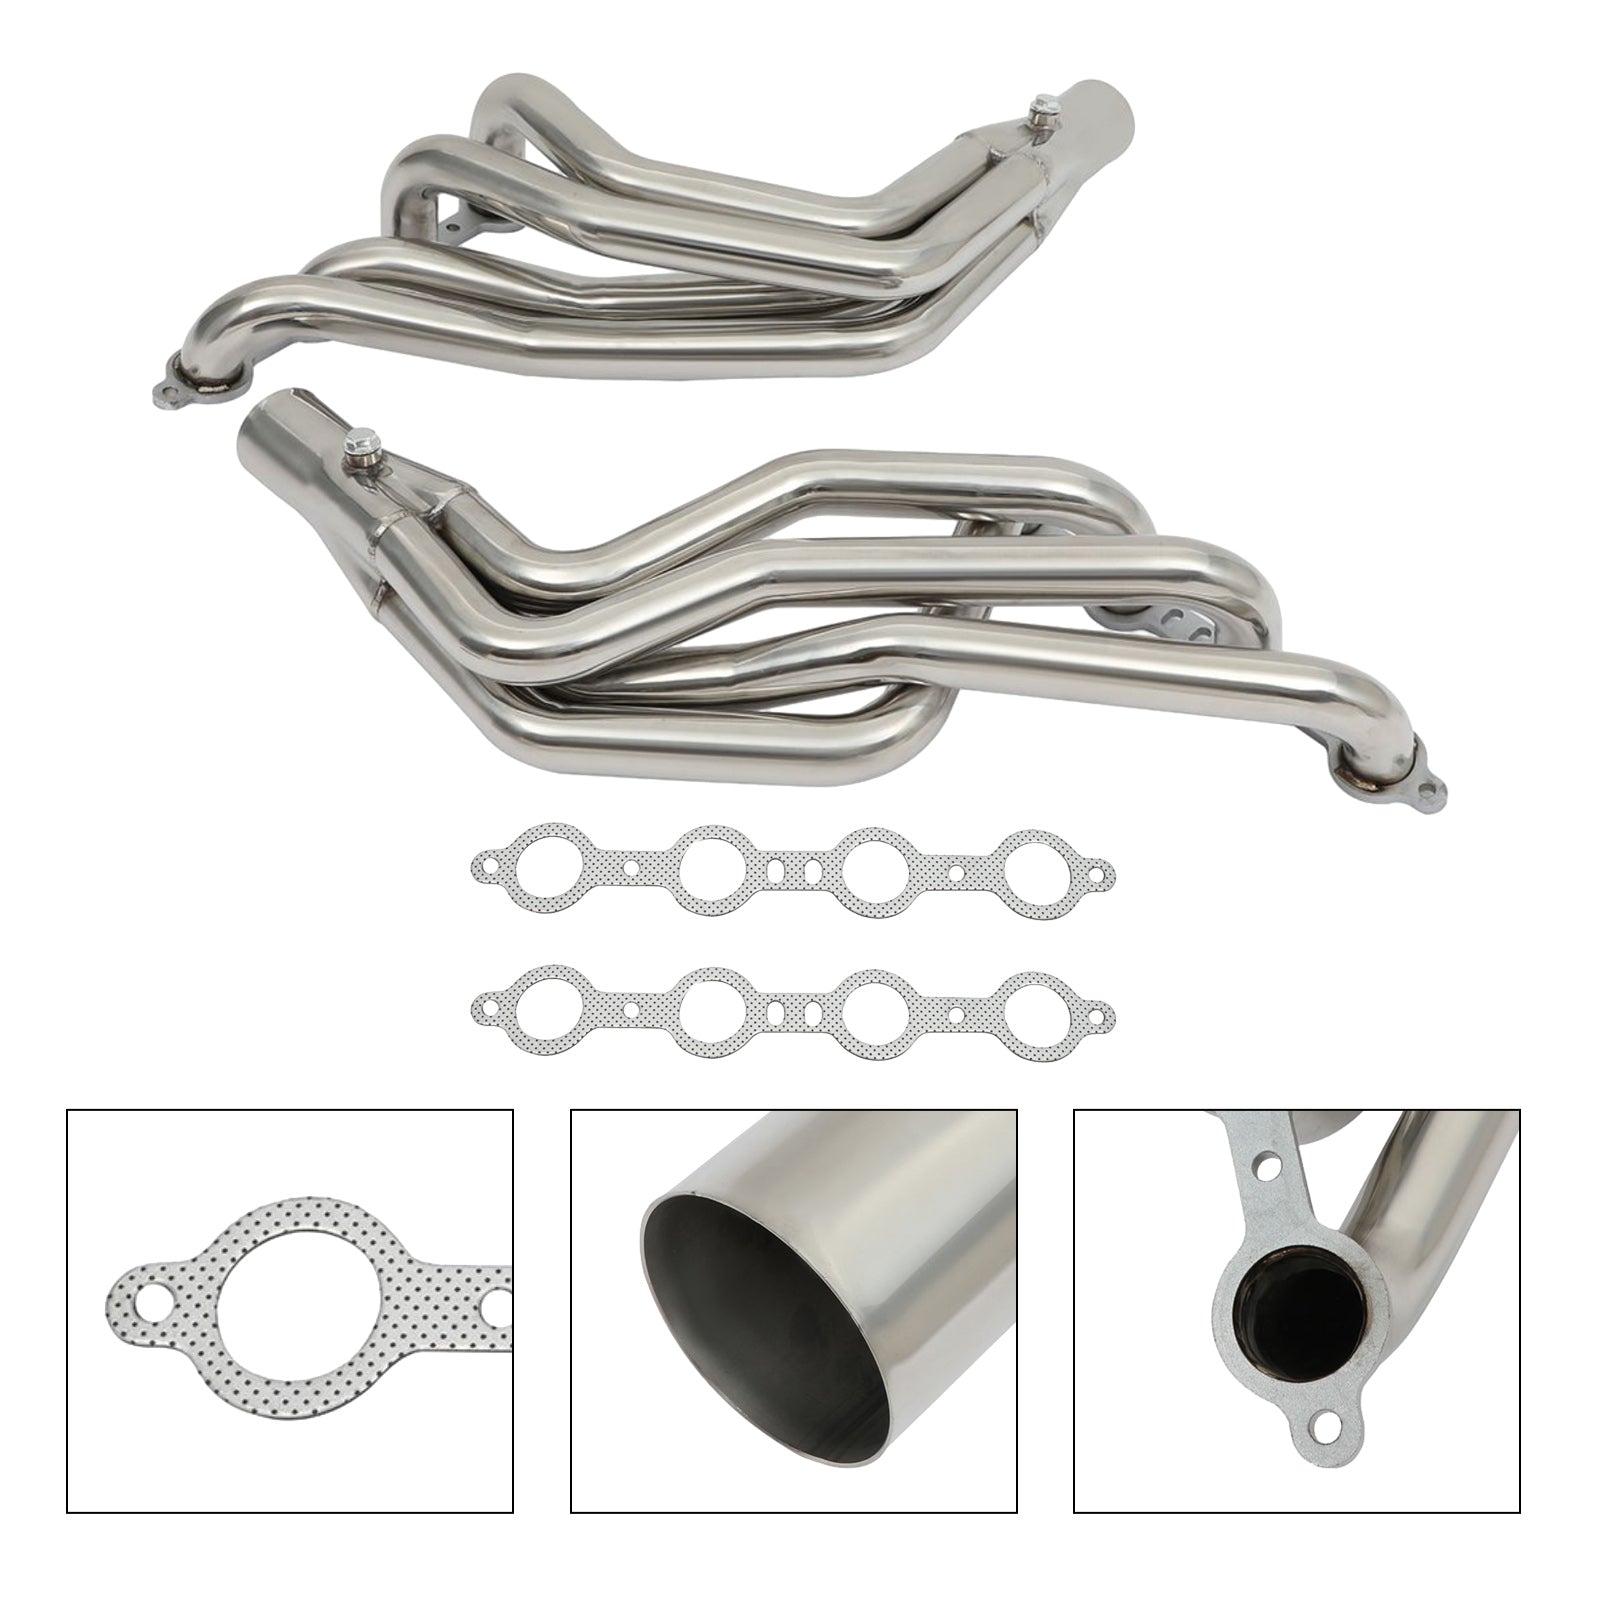 Ford 1979-2004 Mustang 3.8L Stainless Steel Manifold Headers Exhaust